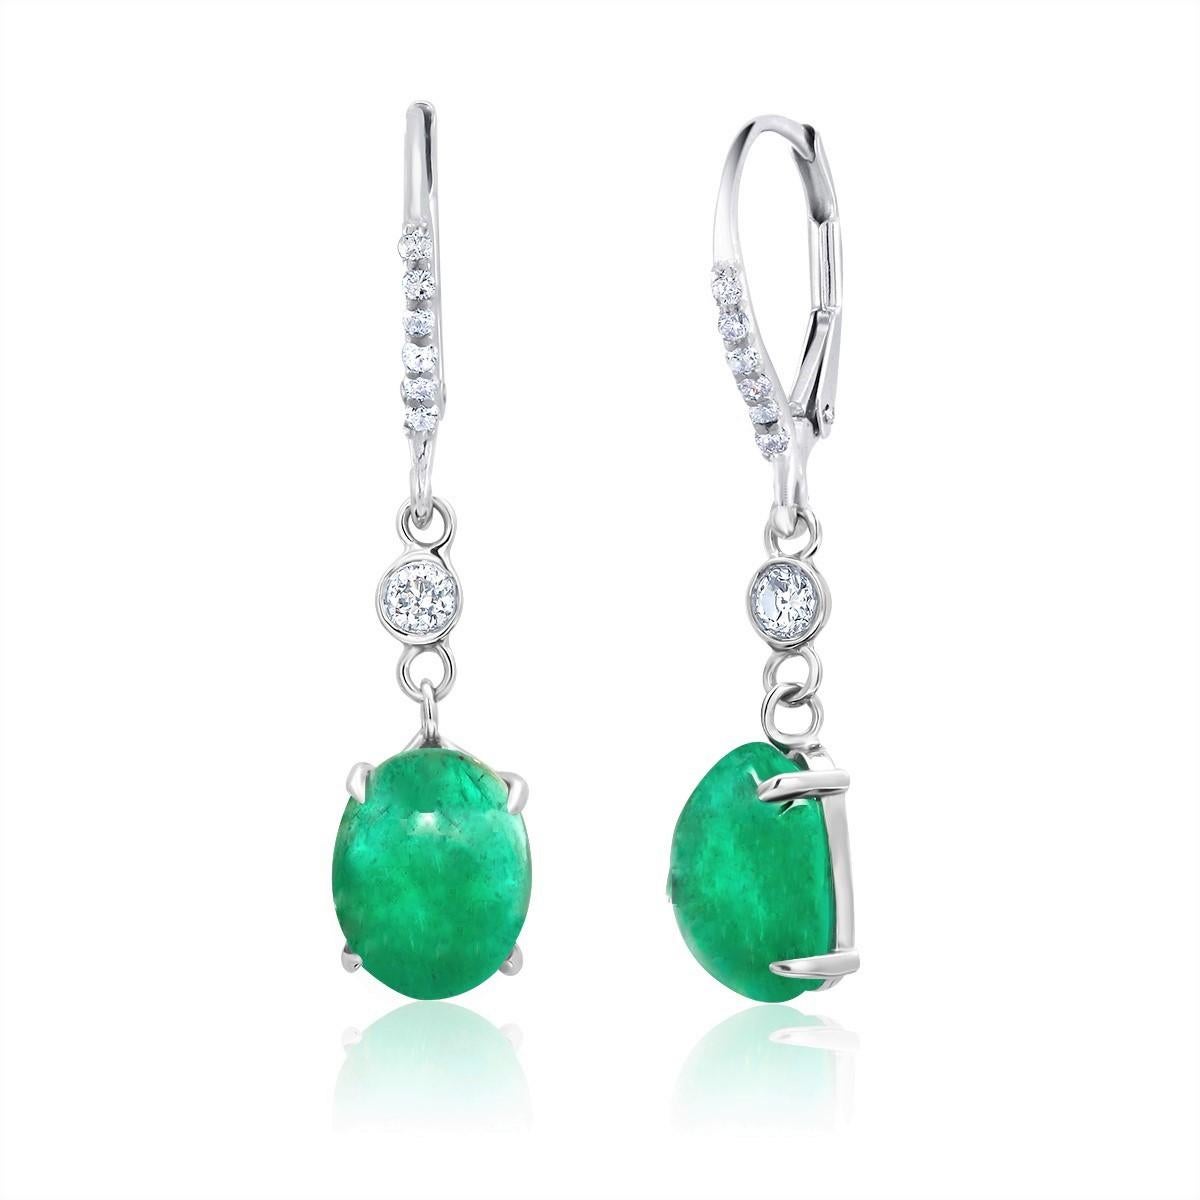 Contemporary Diamond and Cabochon Emerald White Gold Hoop Earrings Weighing 5.08 Carat